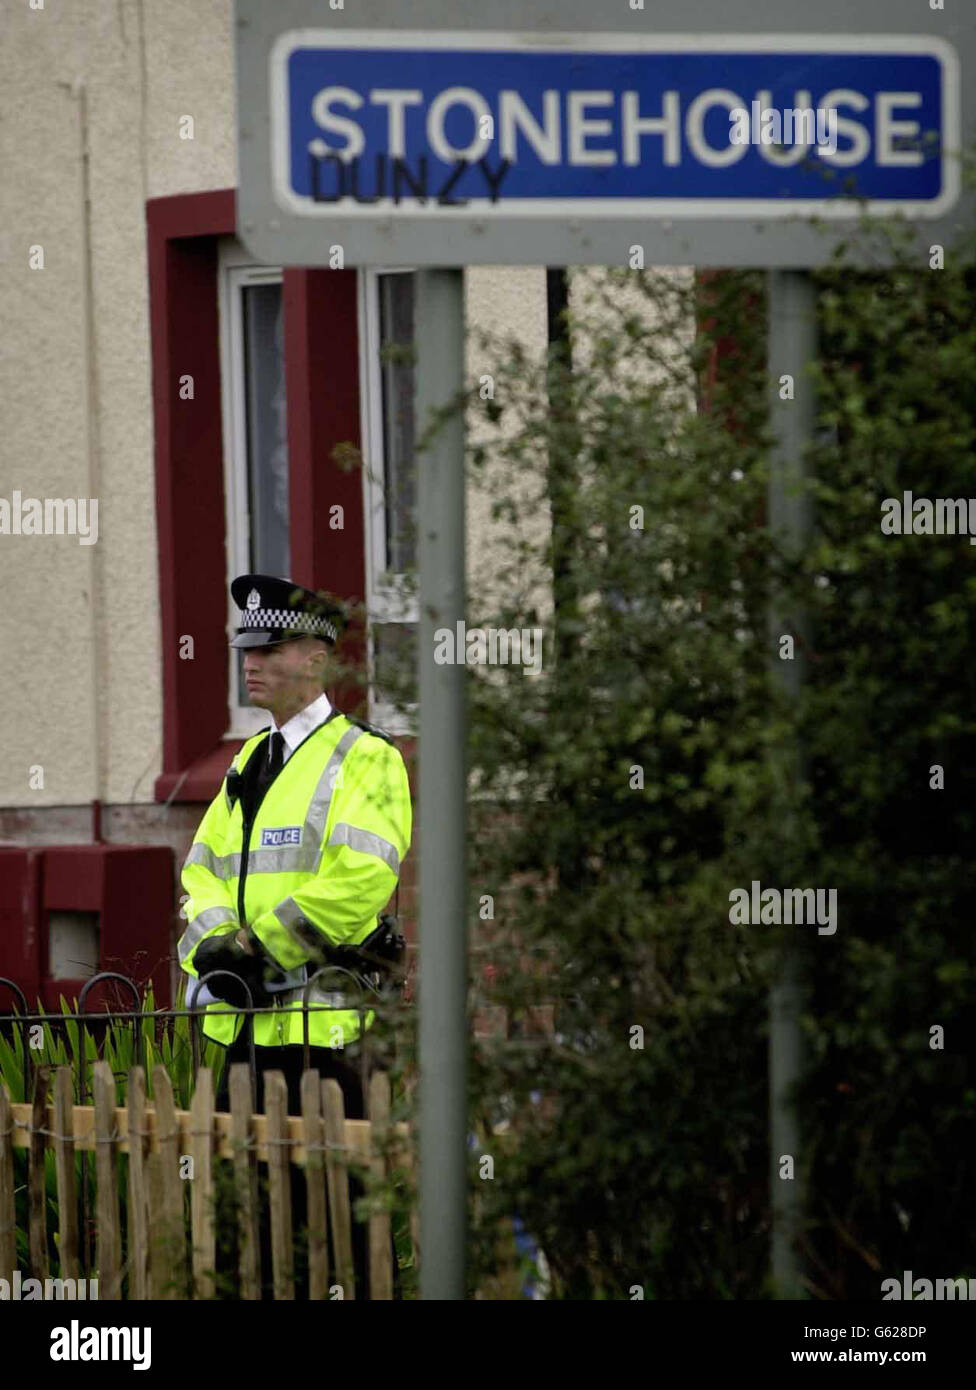 Police wait outside a house in Stonehouse, Lanarkshire, where 10-year-old Louise Gilmour was discovered with the body of her six-year-old sister, Erin. * A 36 year old woman who was also in the house was taken to hospital where police said she was being detained under observation. Louise is currently in Glasgow's Southern General Hospital where her condition was described as serious but stable. Stock Photo